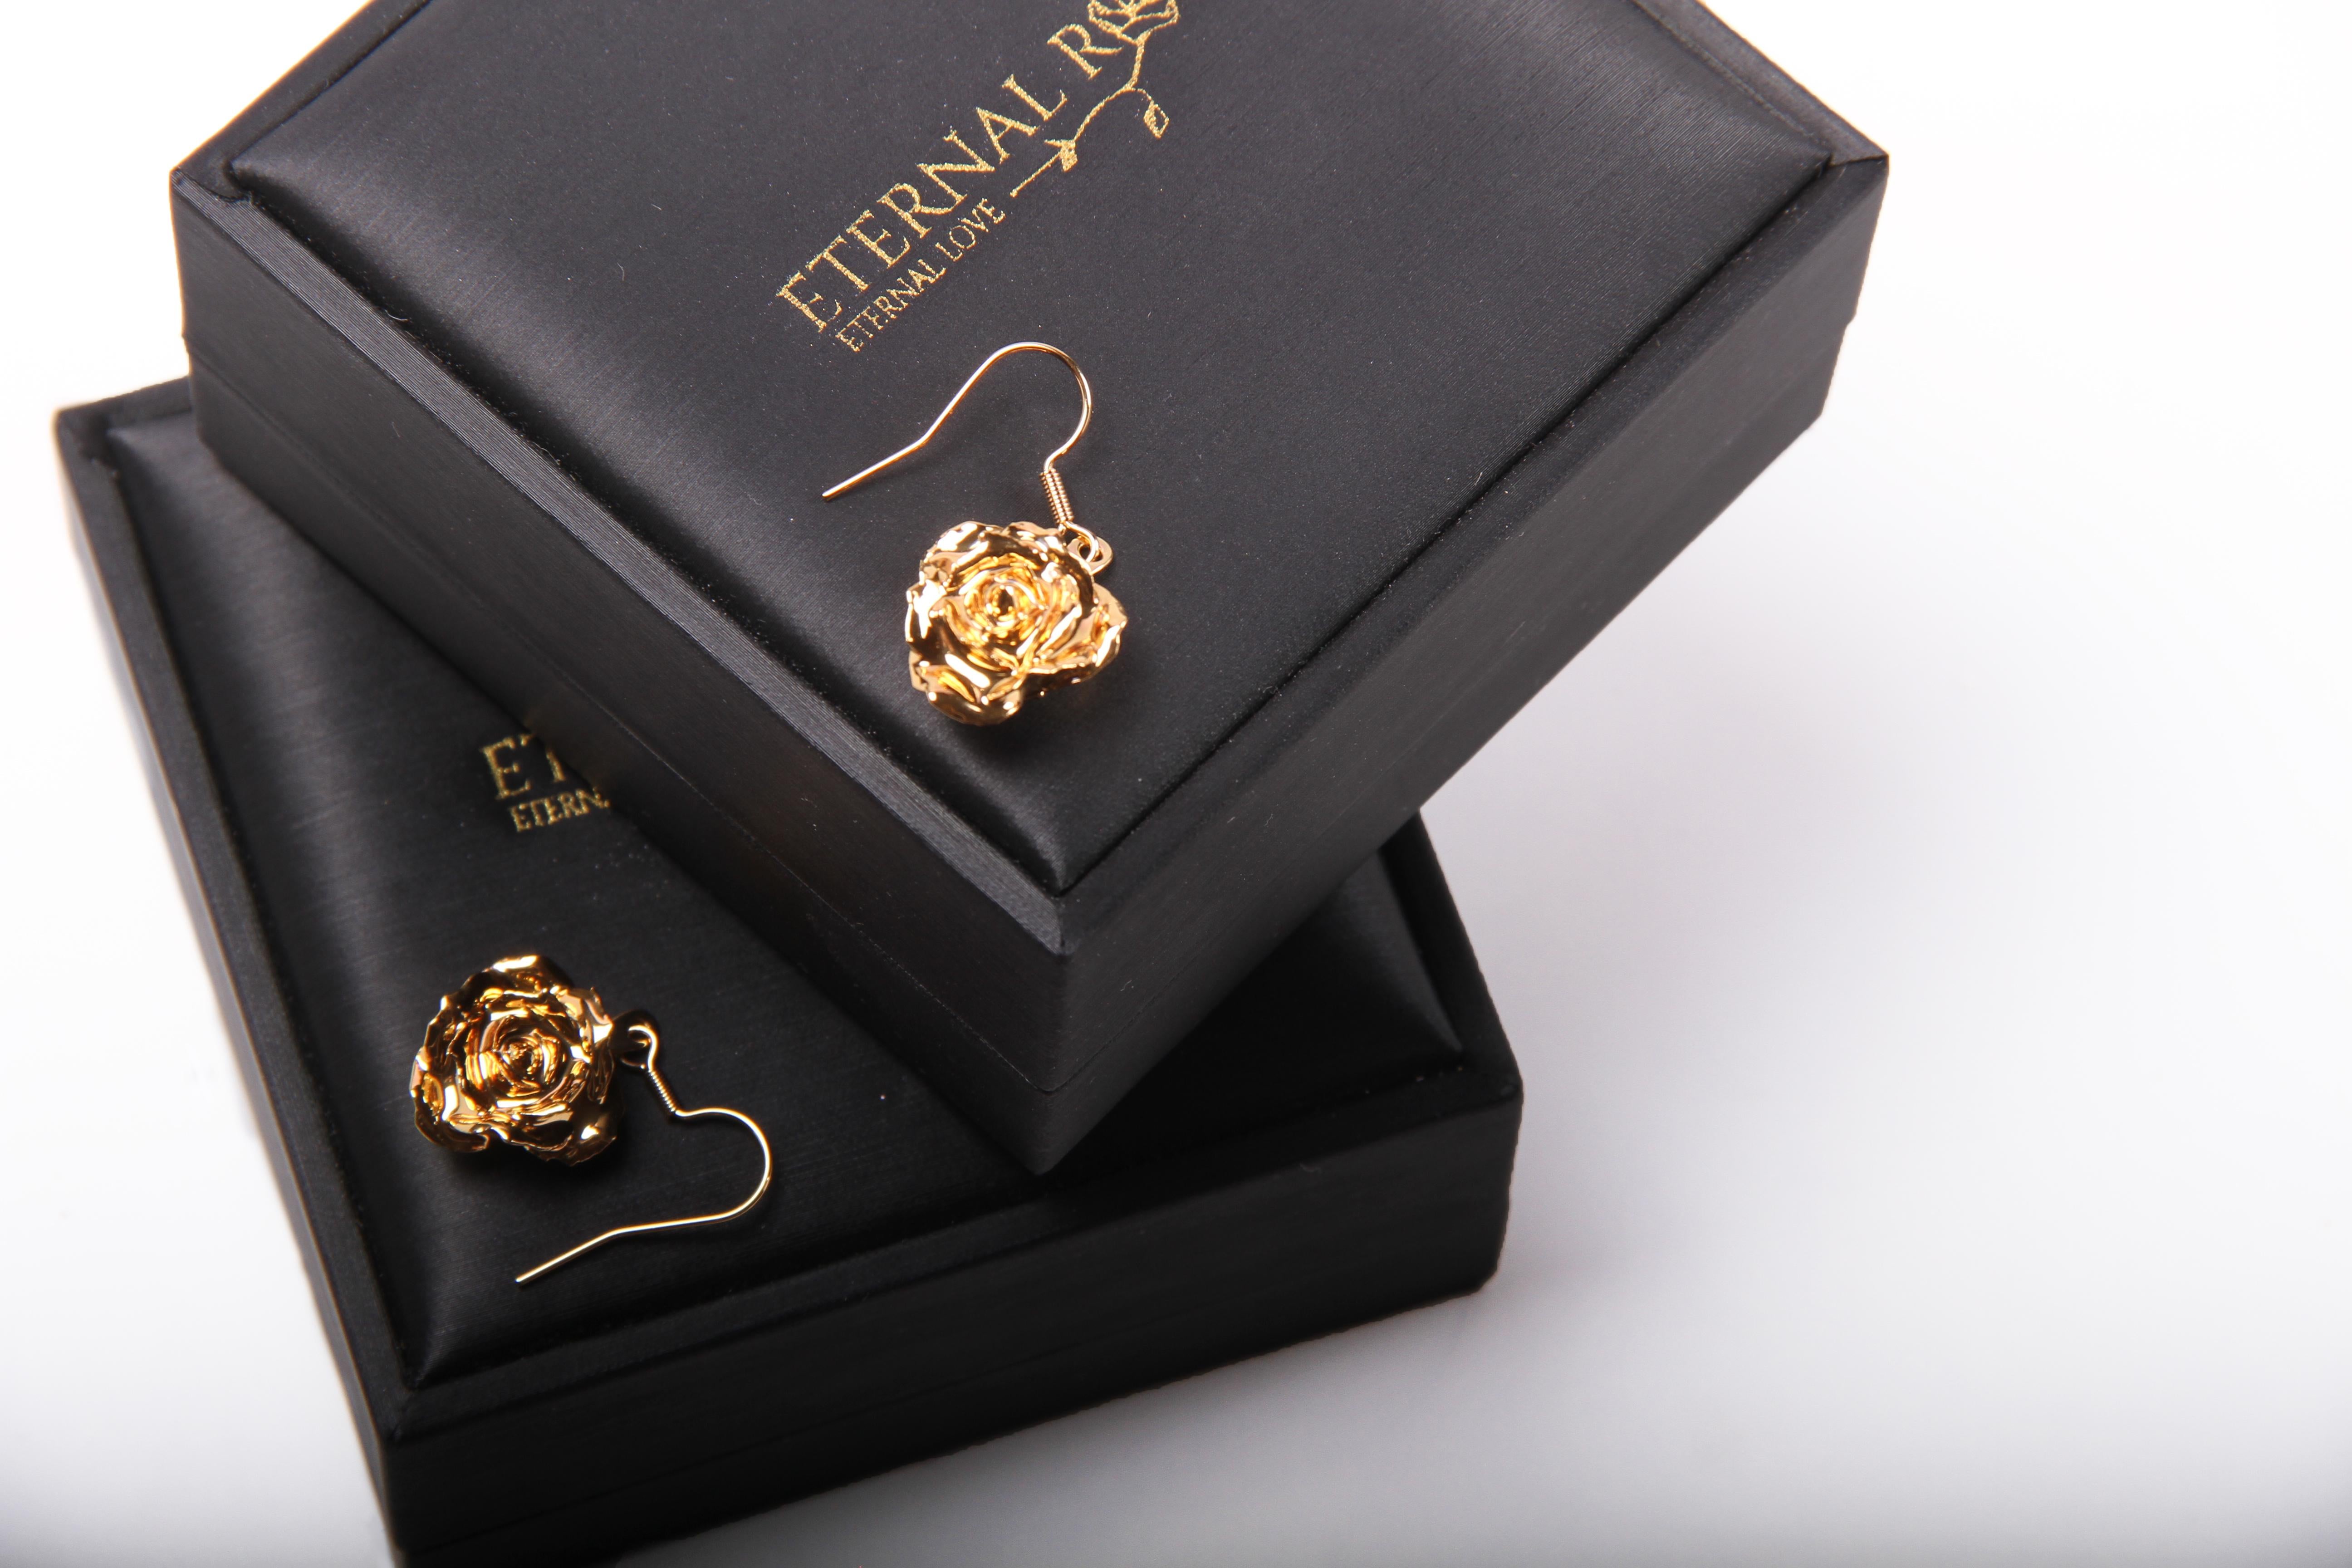 The Wedding Bliss Eternal Earring will accentuate your tenderness and femininity and will bring new perspective to your typical jewelry collection. The earring is intentionally made for bride-to-be and newly married people, however it is your choice